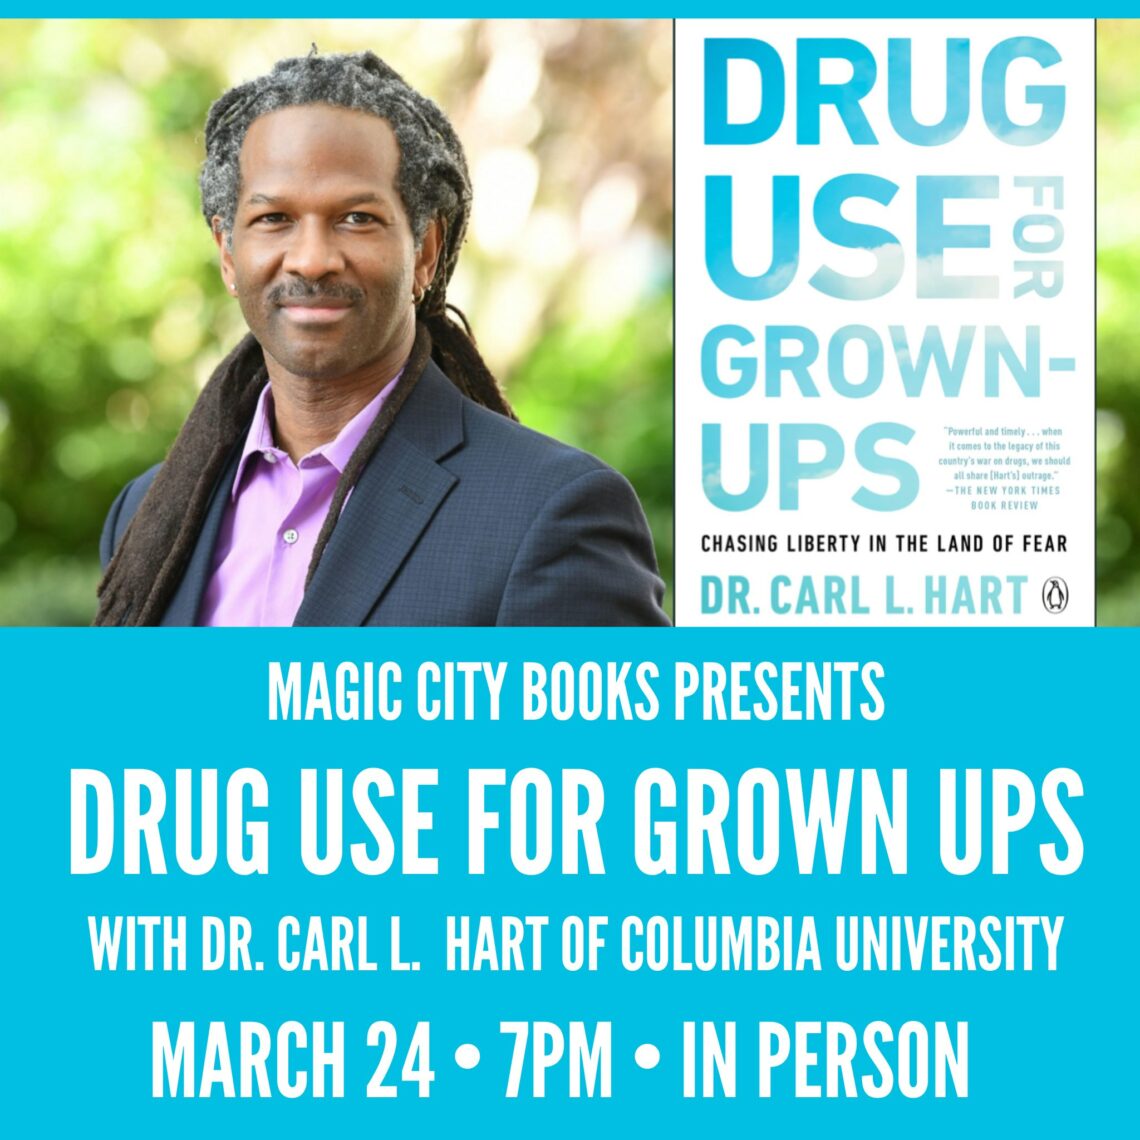 MAGIC CITY BOOKS PRESENTS DRUG USE FOR GROWN UPS